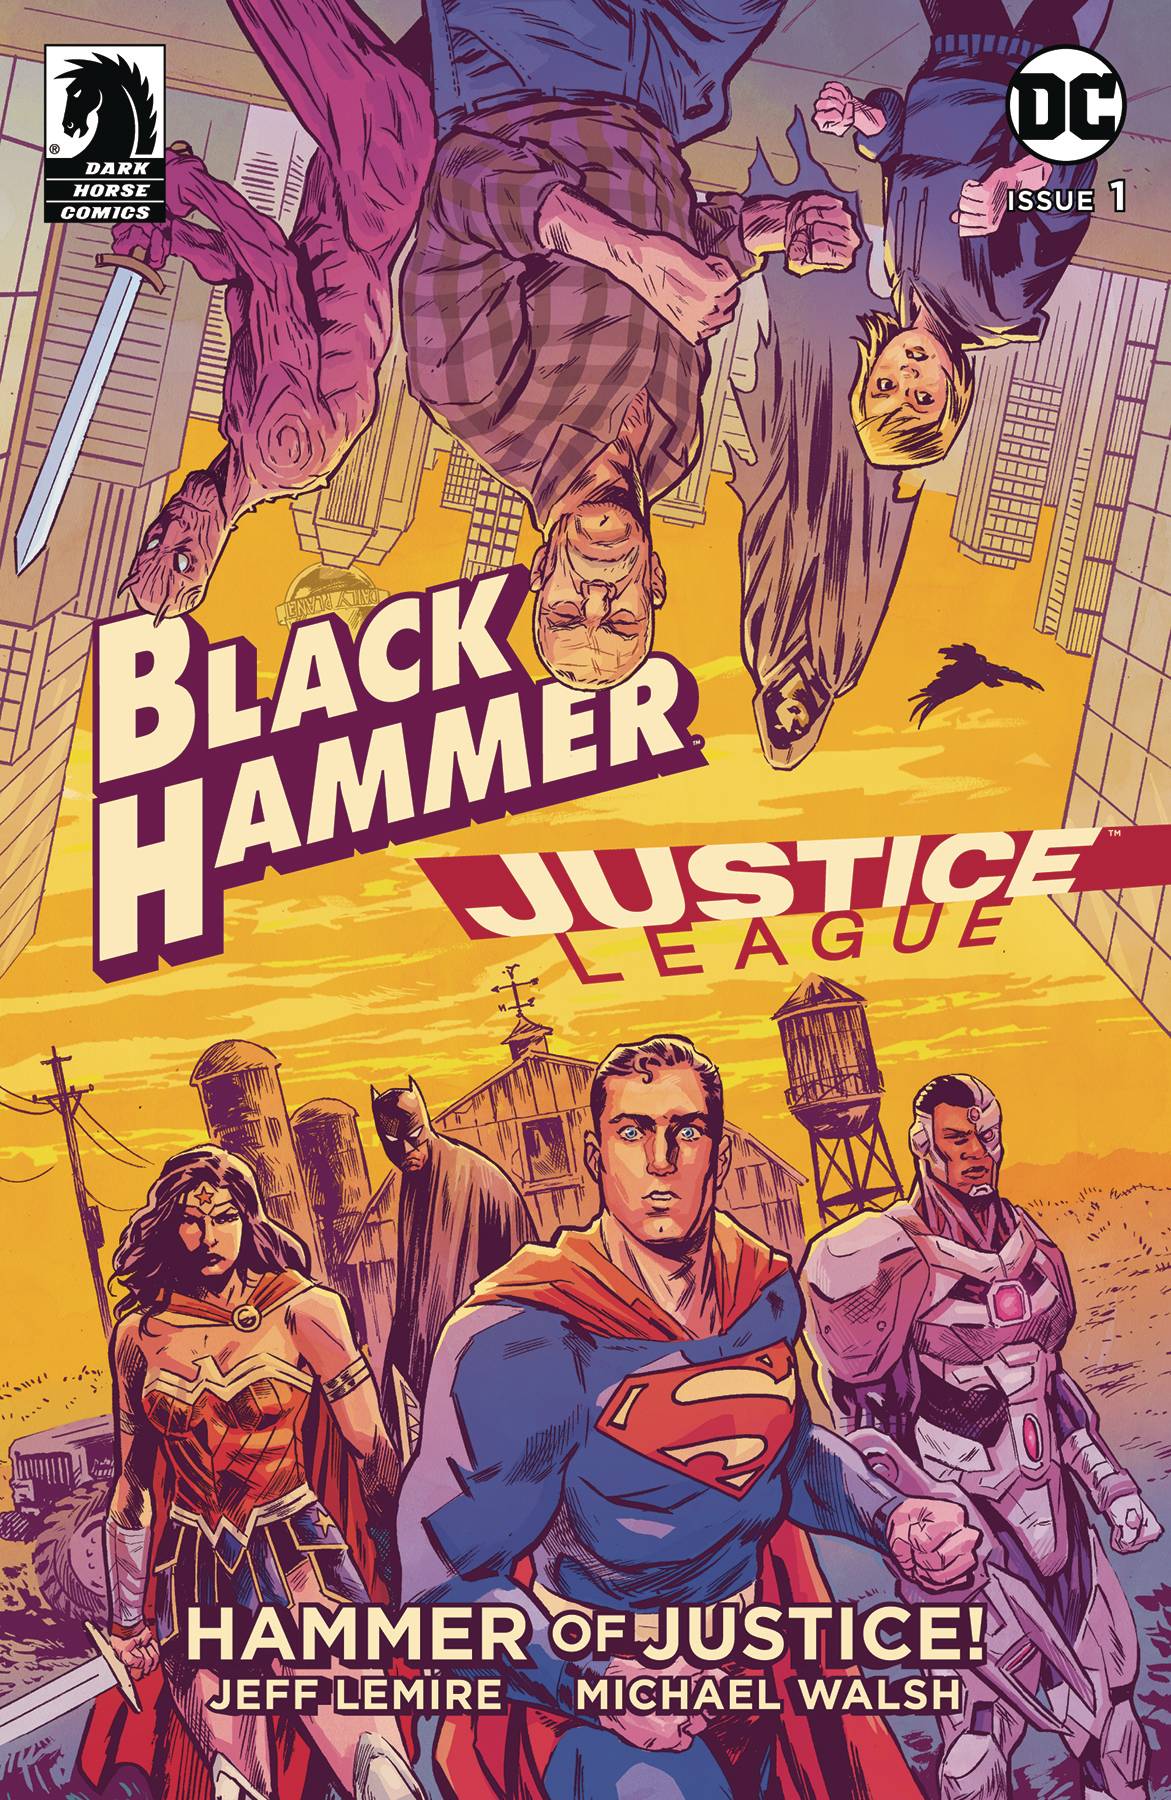 Black Hammer Justice League #1 Cover A Walsh (Of 5)